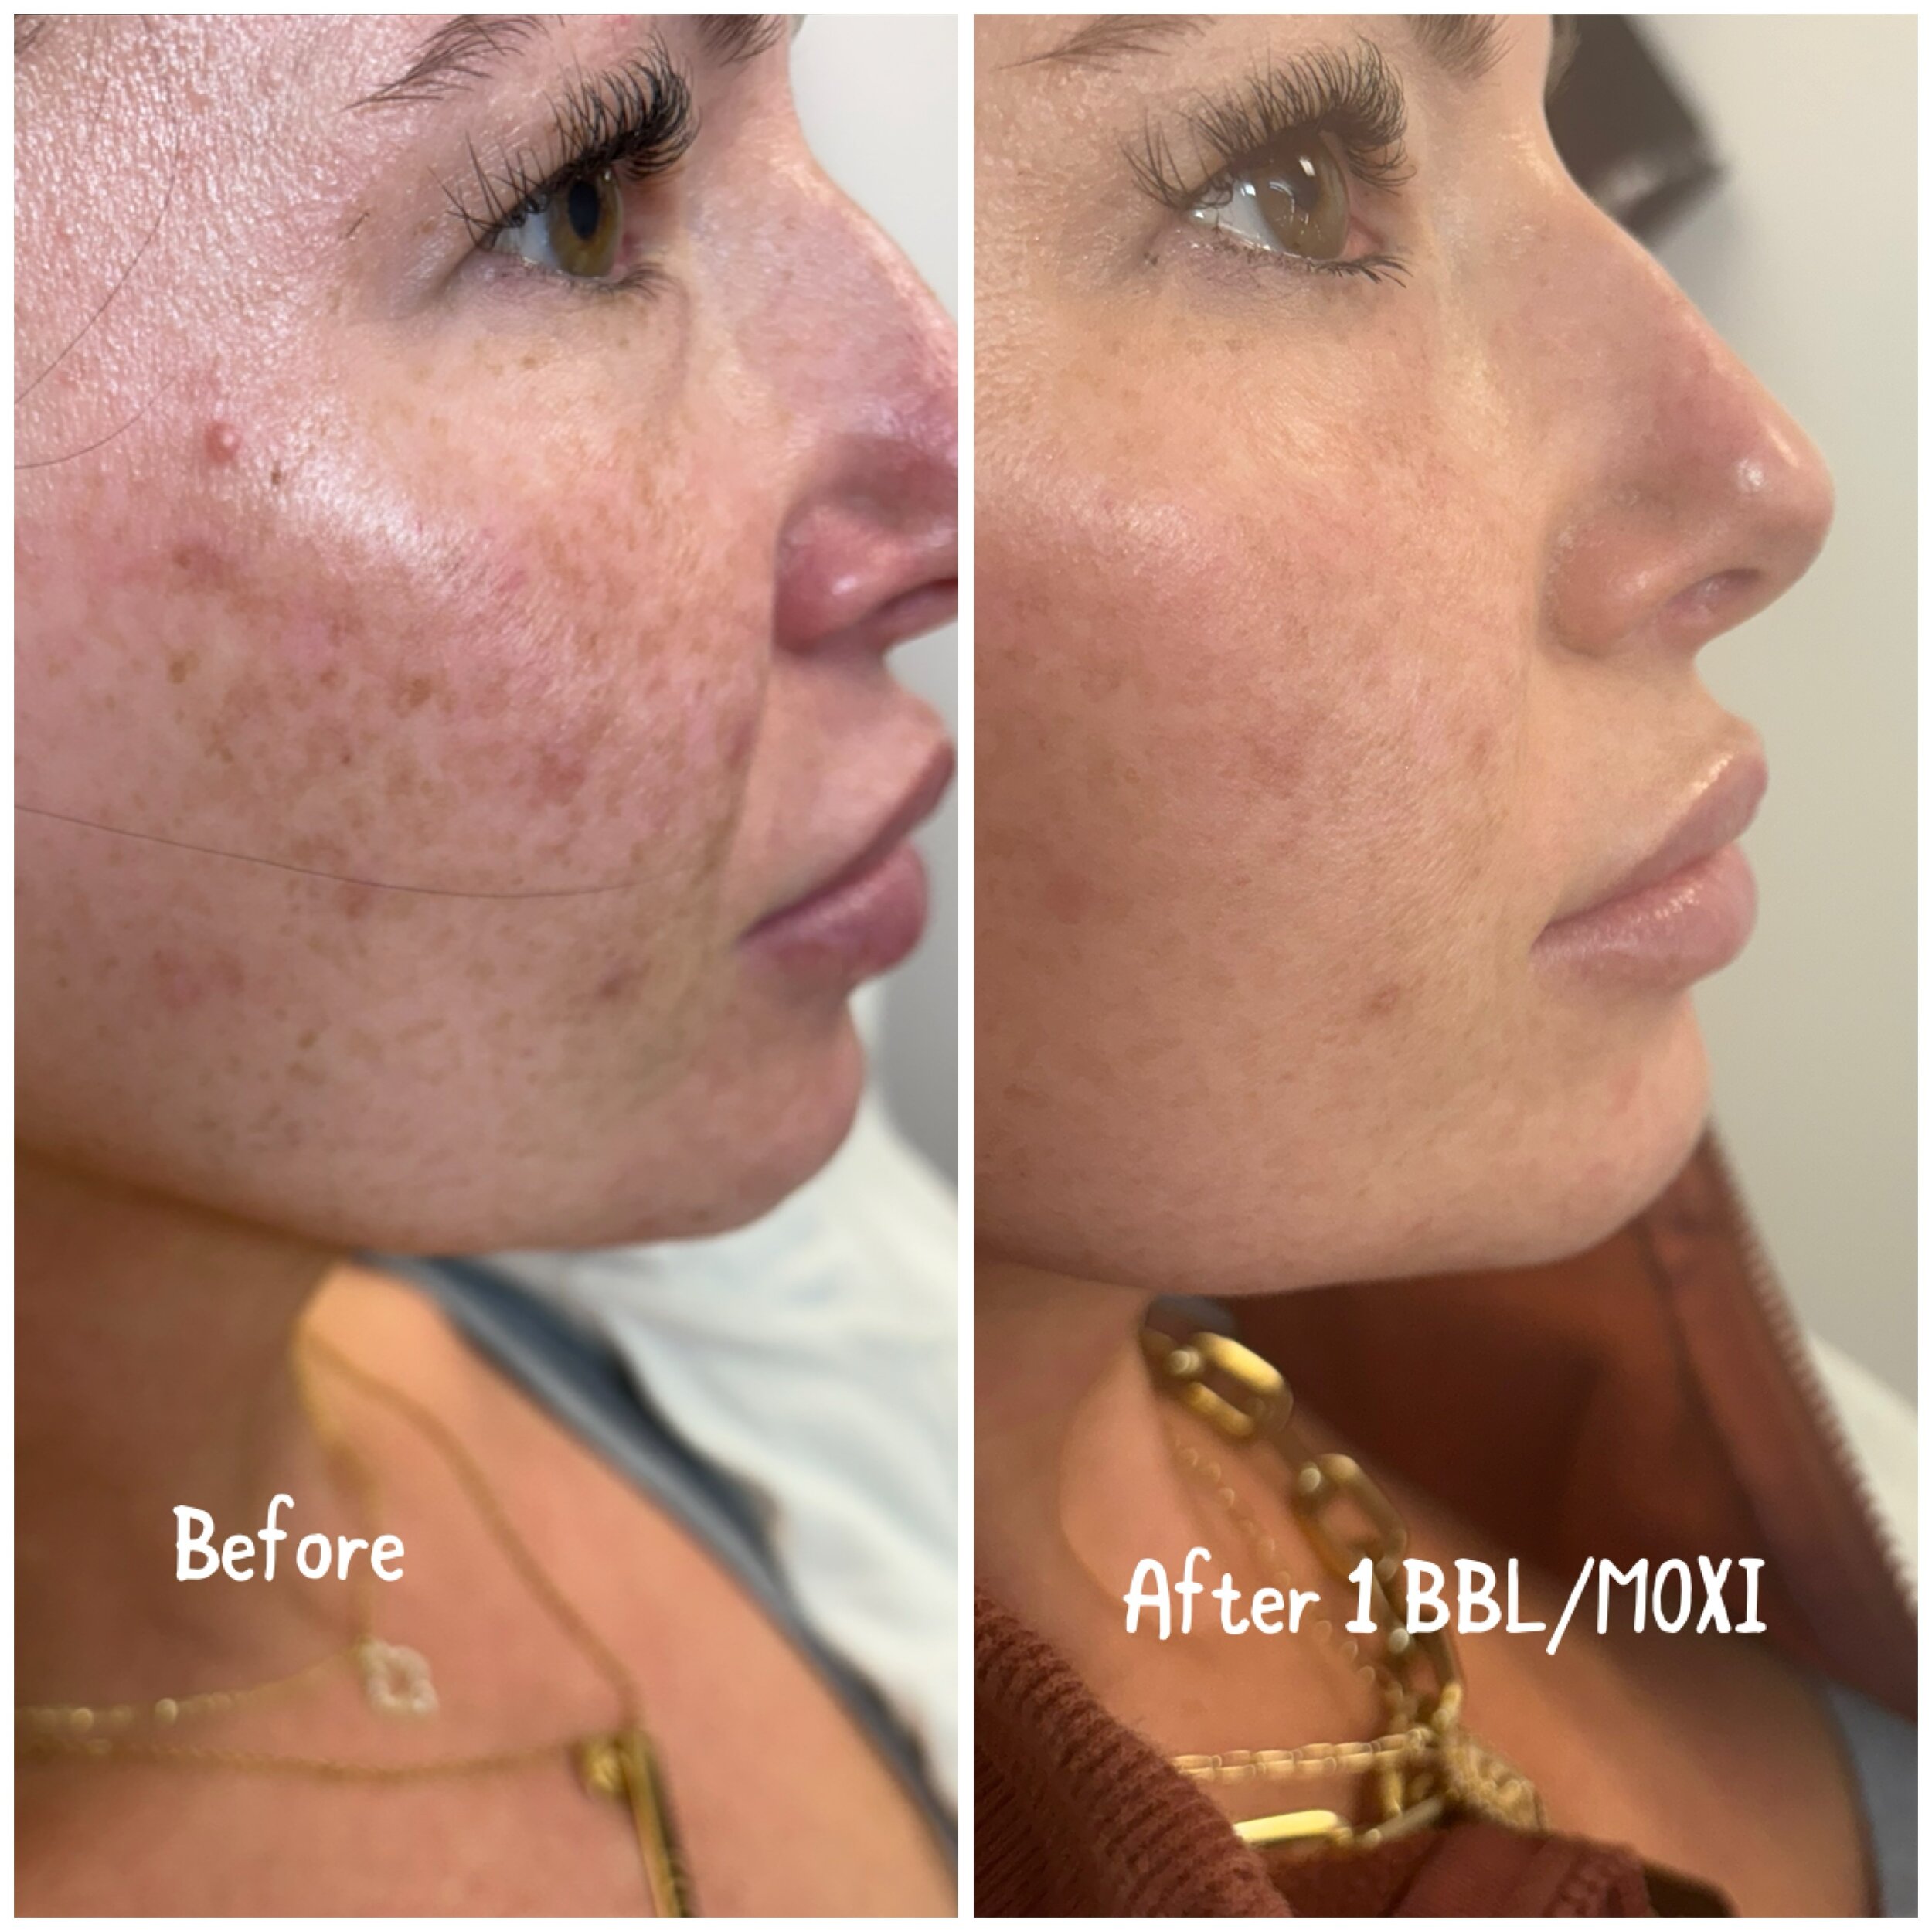 We are sooo happy with these results after only one BBL/Moxi treatment!!! Book your appointment now and get your treatment done soon. Wellness Revolution will be closed from 3/29 until 4/8